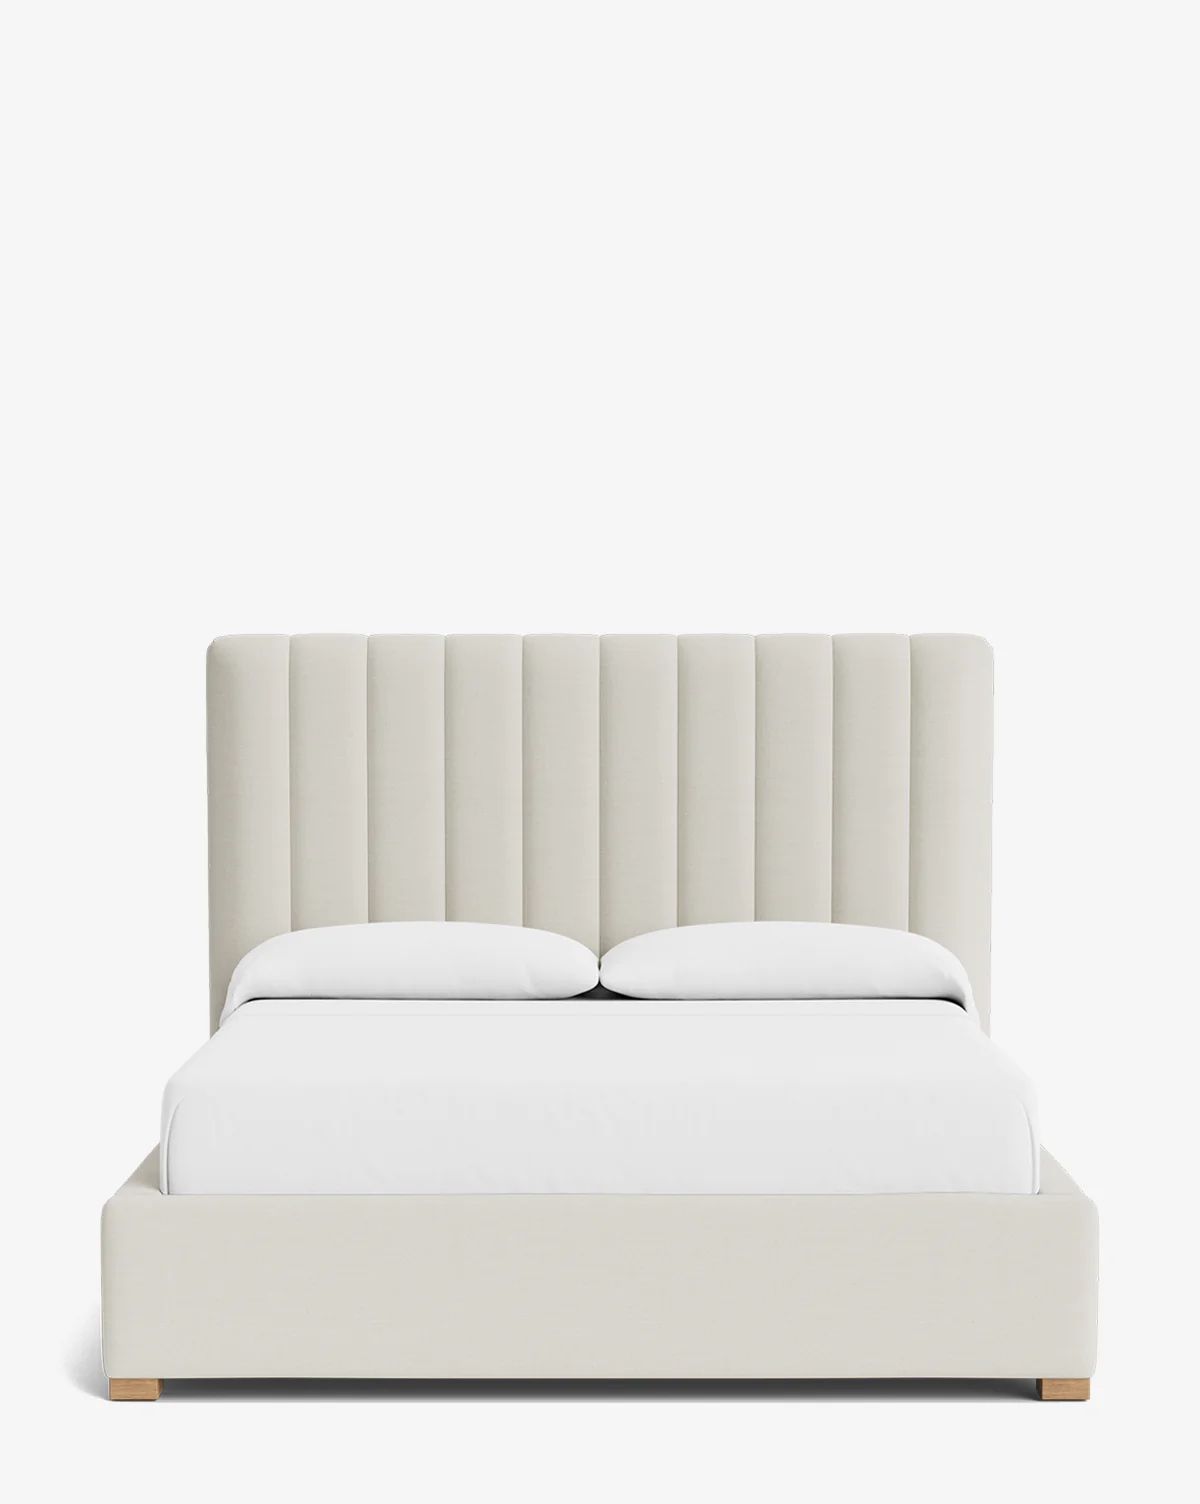 Hoffman Bed | McGee & Co.